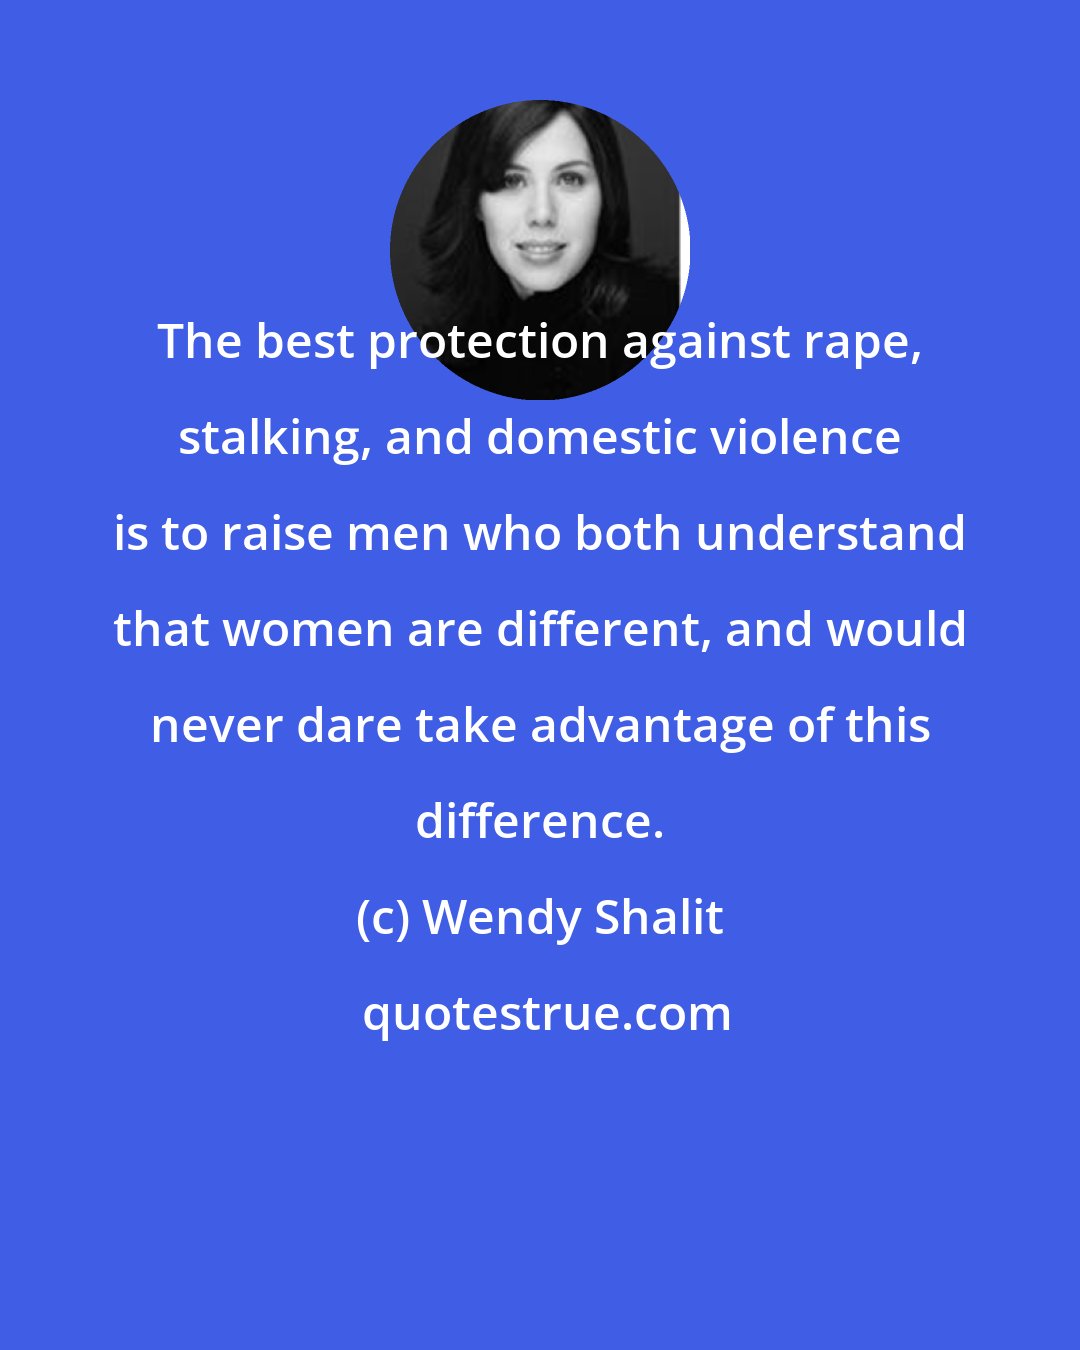 Wendy Shalit: The best protection against rape, stalking, and domestic violence is to raise men who both understand that women are different, and would never dare take advantage of this difference.